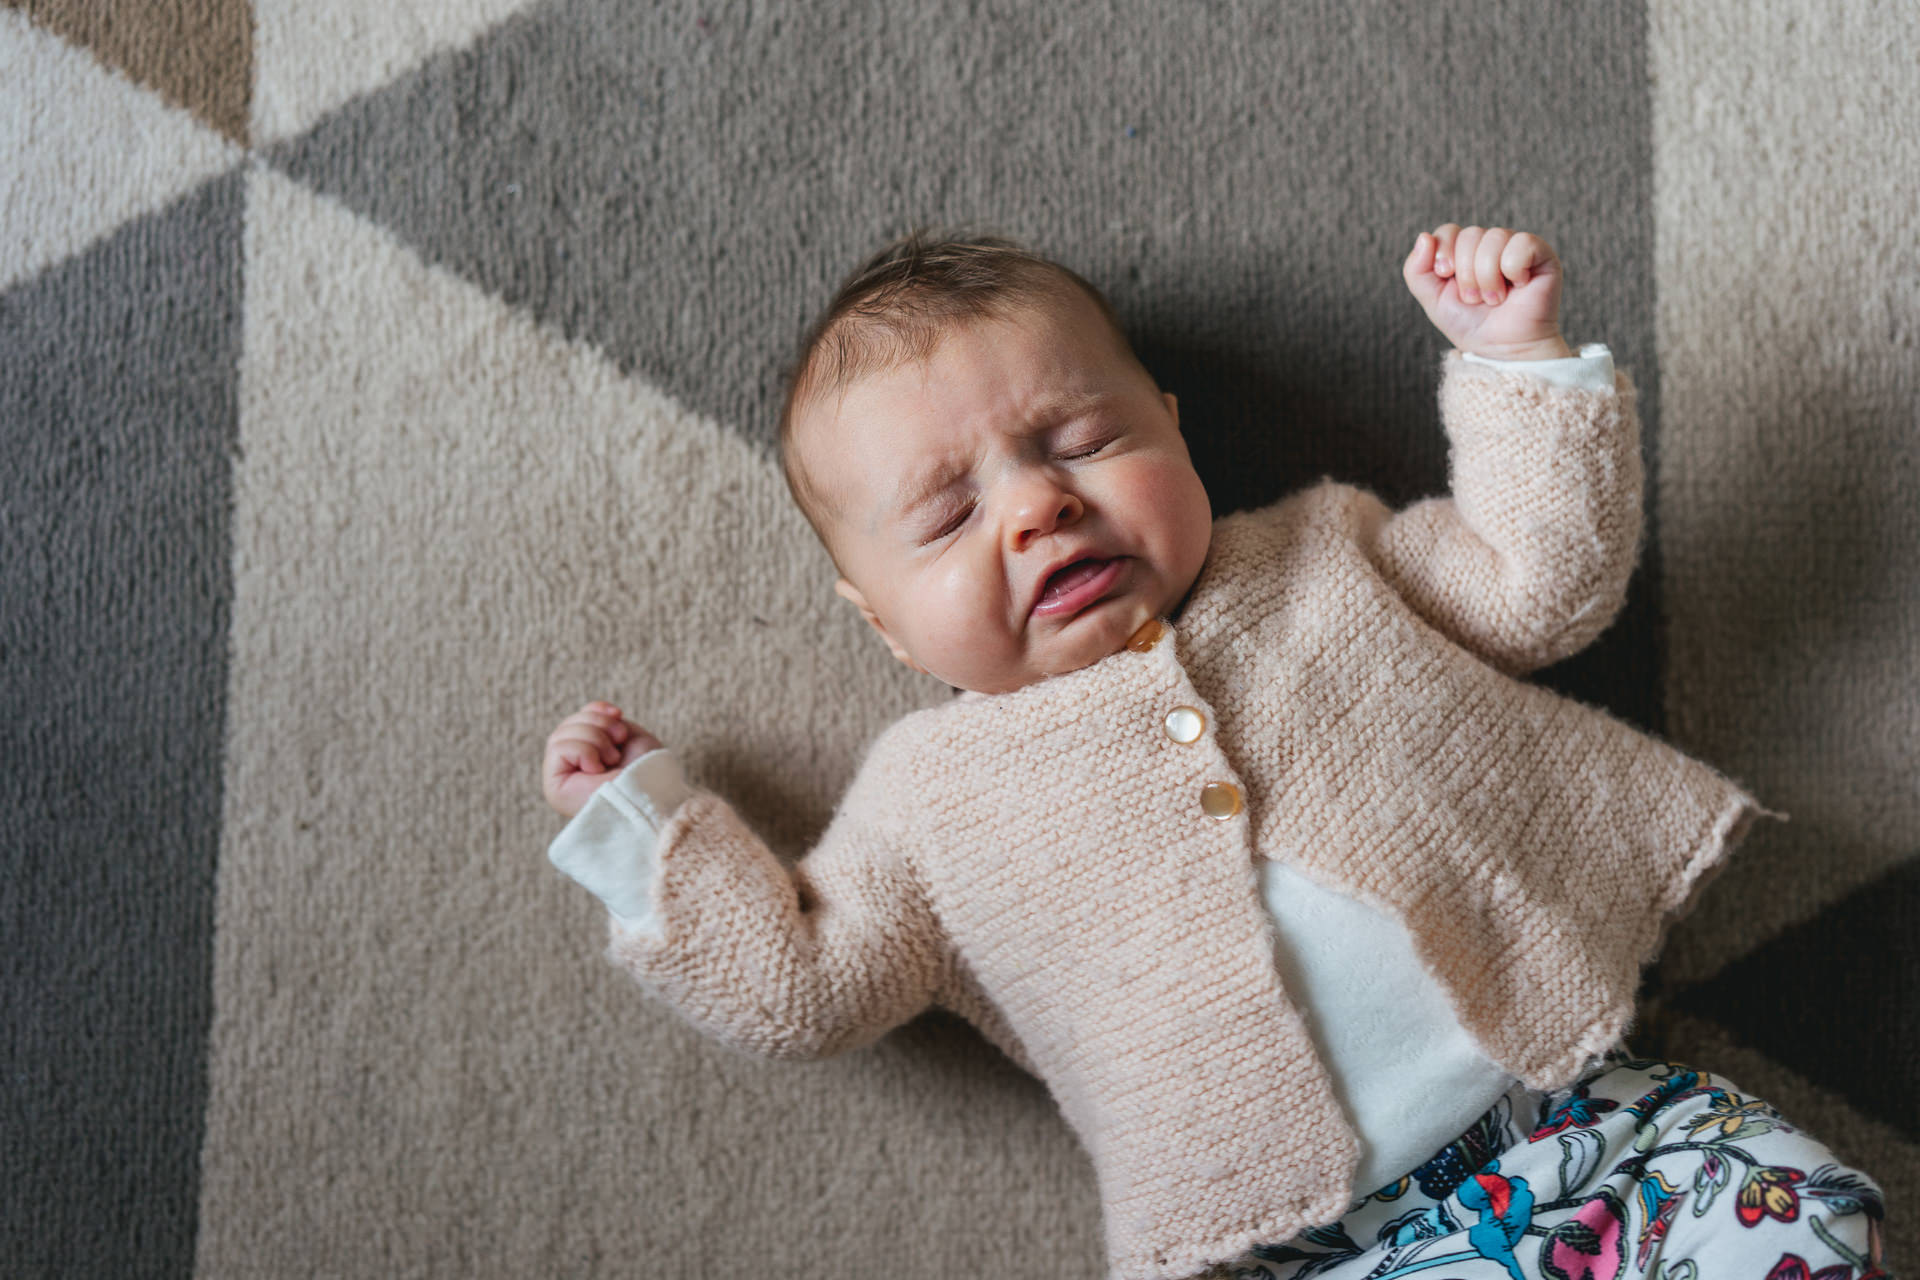 A baby sneezing on a rug